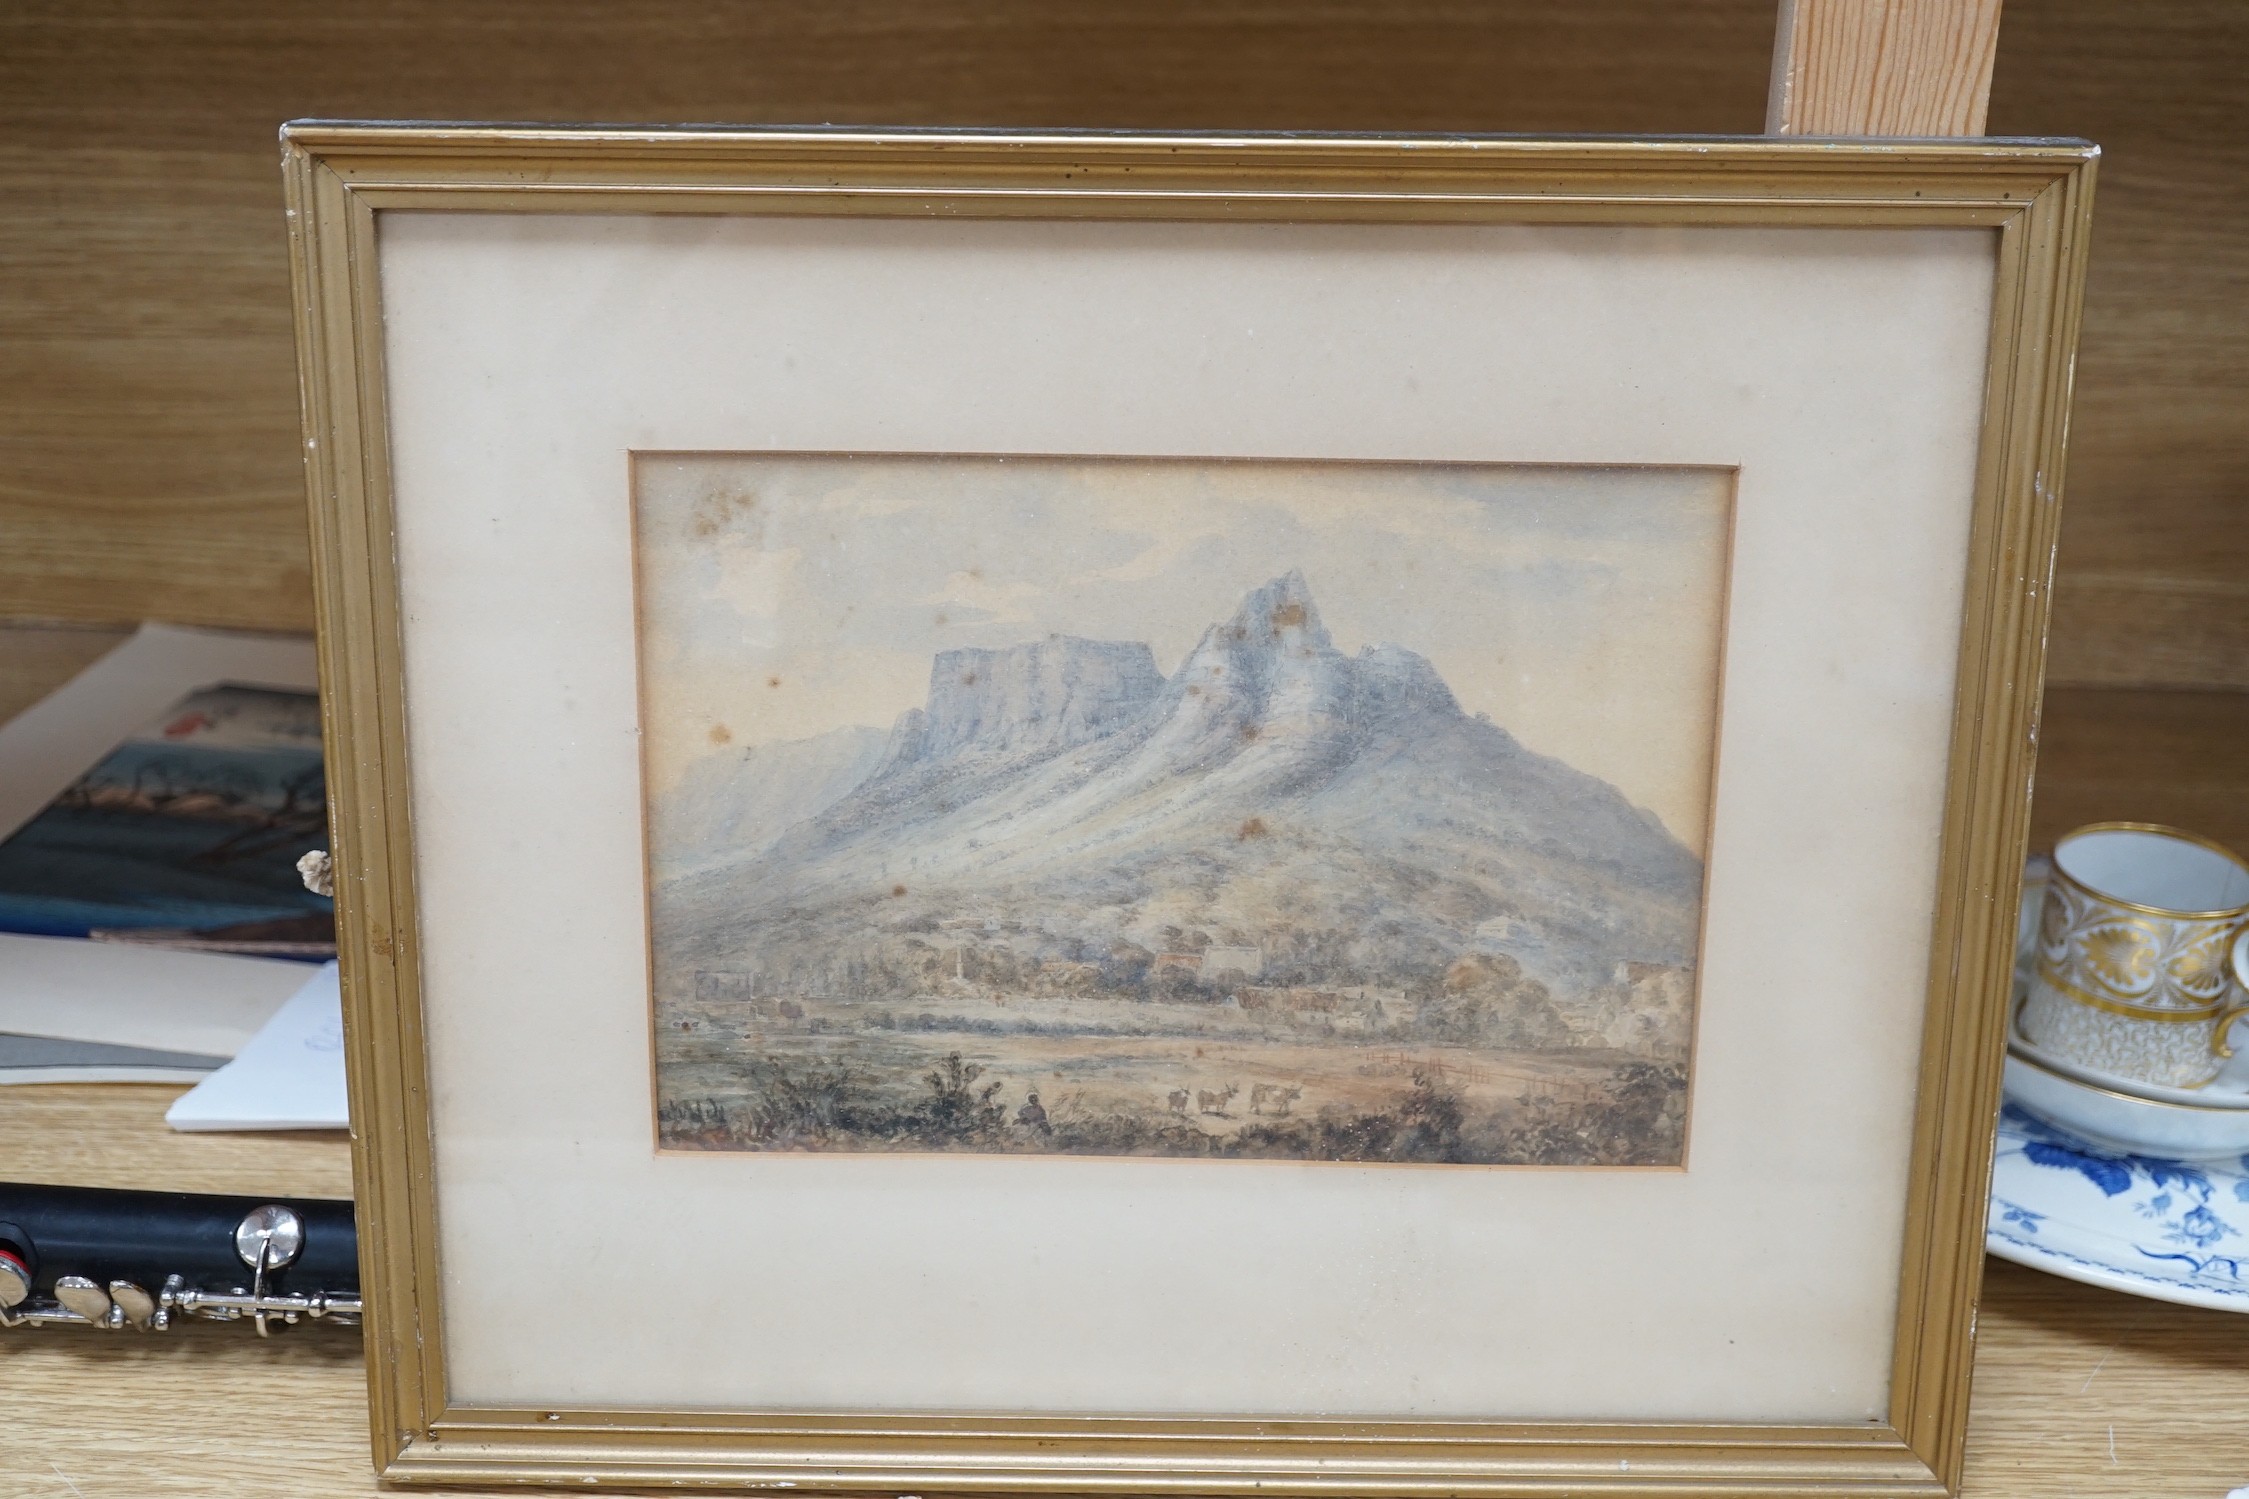 19th century South African School, watercolour, 'Lion's Head 1865, Devils Peake and Table Mountain from Rondevosch', 17 x 25cm